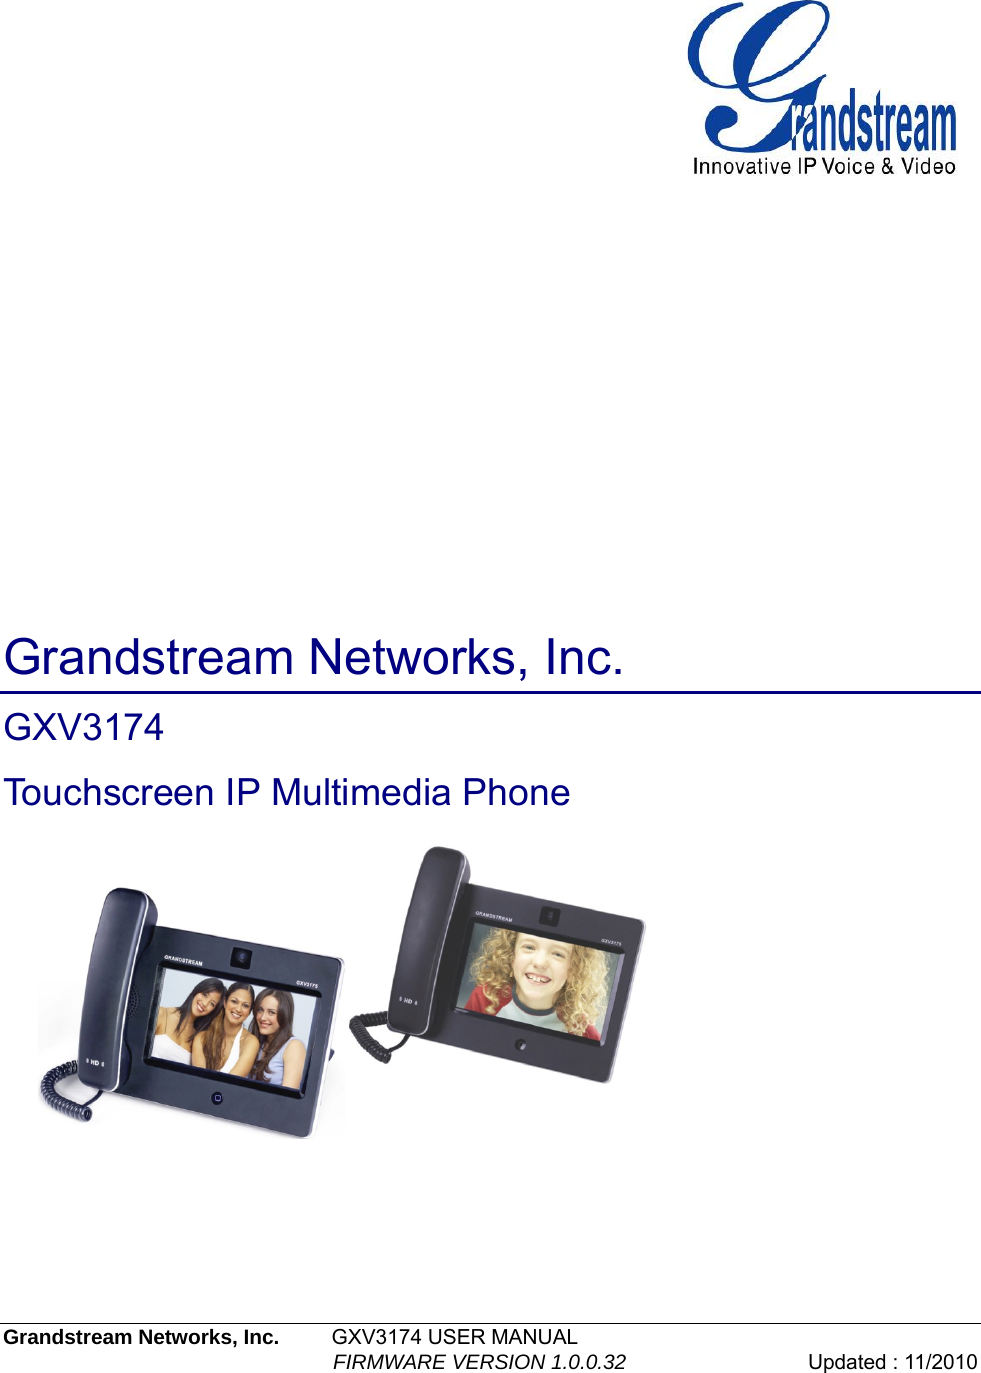               Grandstream Networks, Inc. GXV3174  Touchscreen IP Multimedia Phone  Grandstream Networks, Inc.         GXV3174 USER MANUAL                                                            FIRMWARE VERSION 1.0.0.32  Updated : 11/2010   